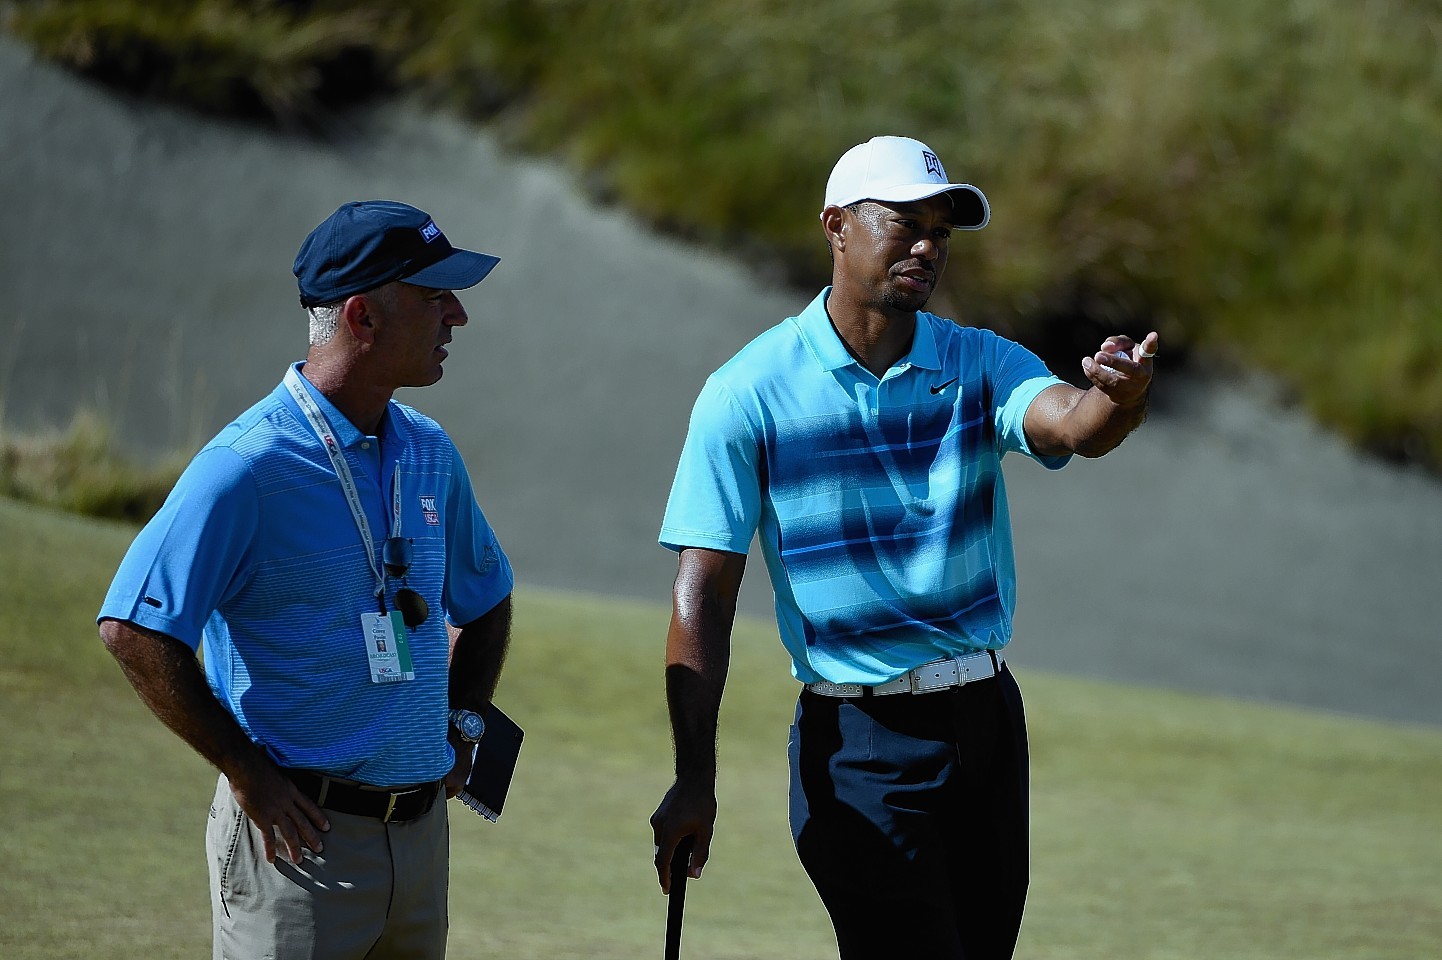 Tiger Woods during a practice round prior to the start of the 115th US Open